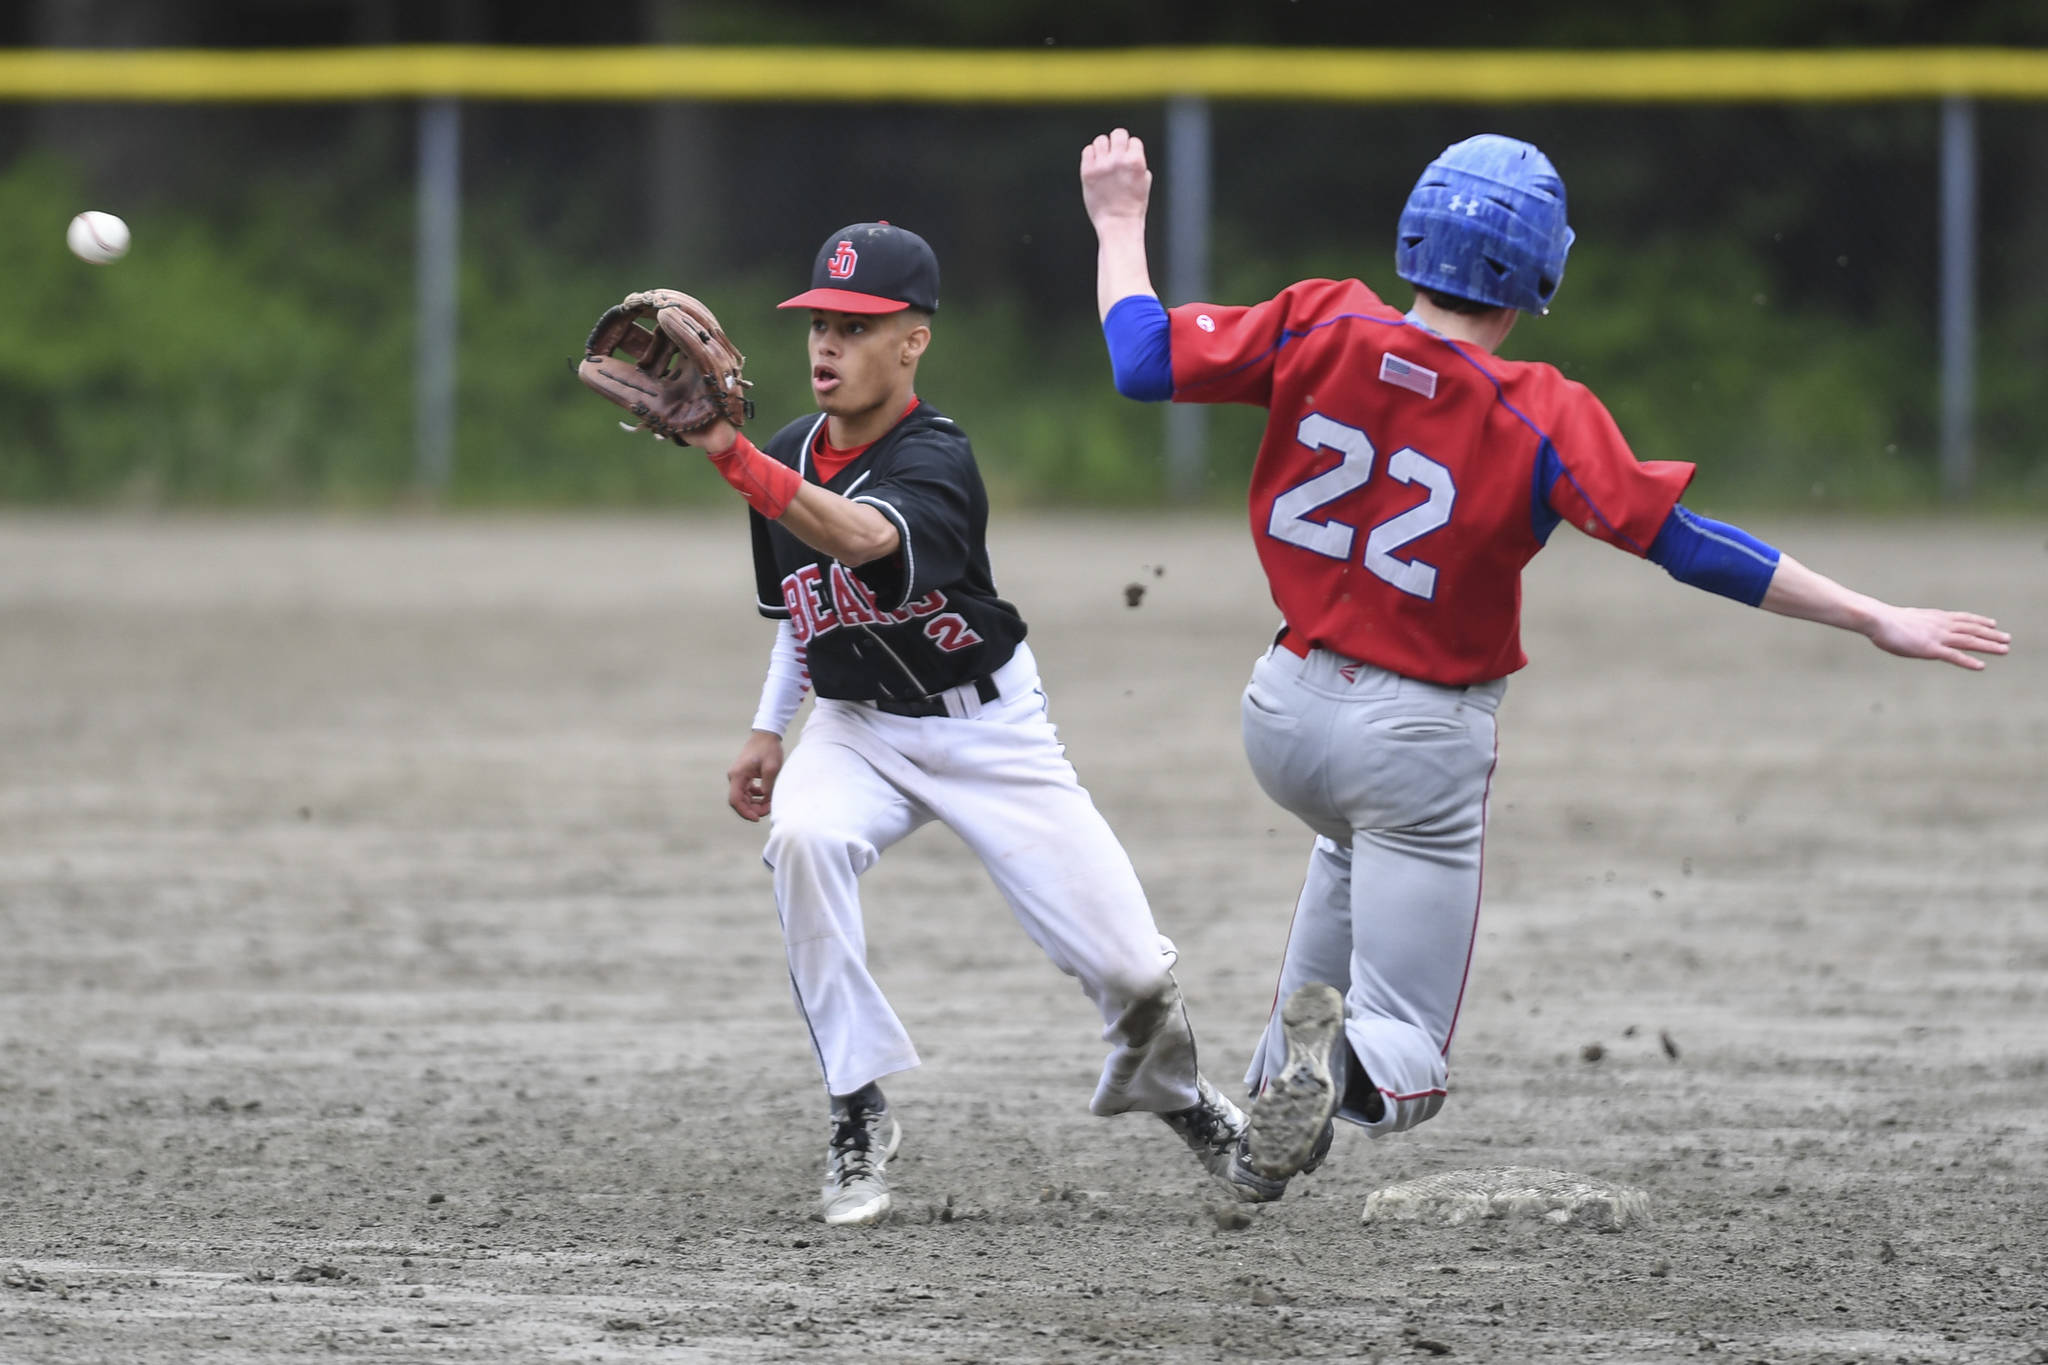 Sitka’s Michael Leach, right, beats the throw to Juneau-Douglas’ Gaby Soto to steal second base during the Region V Baseball Championship at Adair-Kennedy Memorial Park on Thursday, May 23, 2019. JDHS won 6-5. (Michael Penn | Juneau Empire)